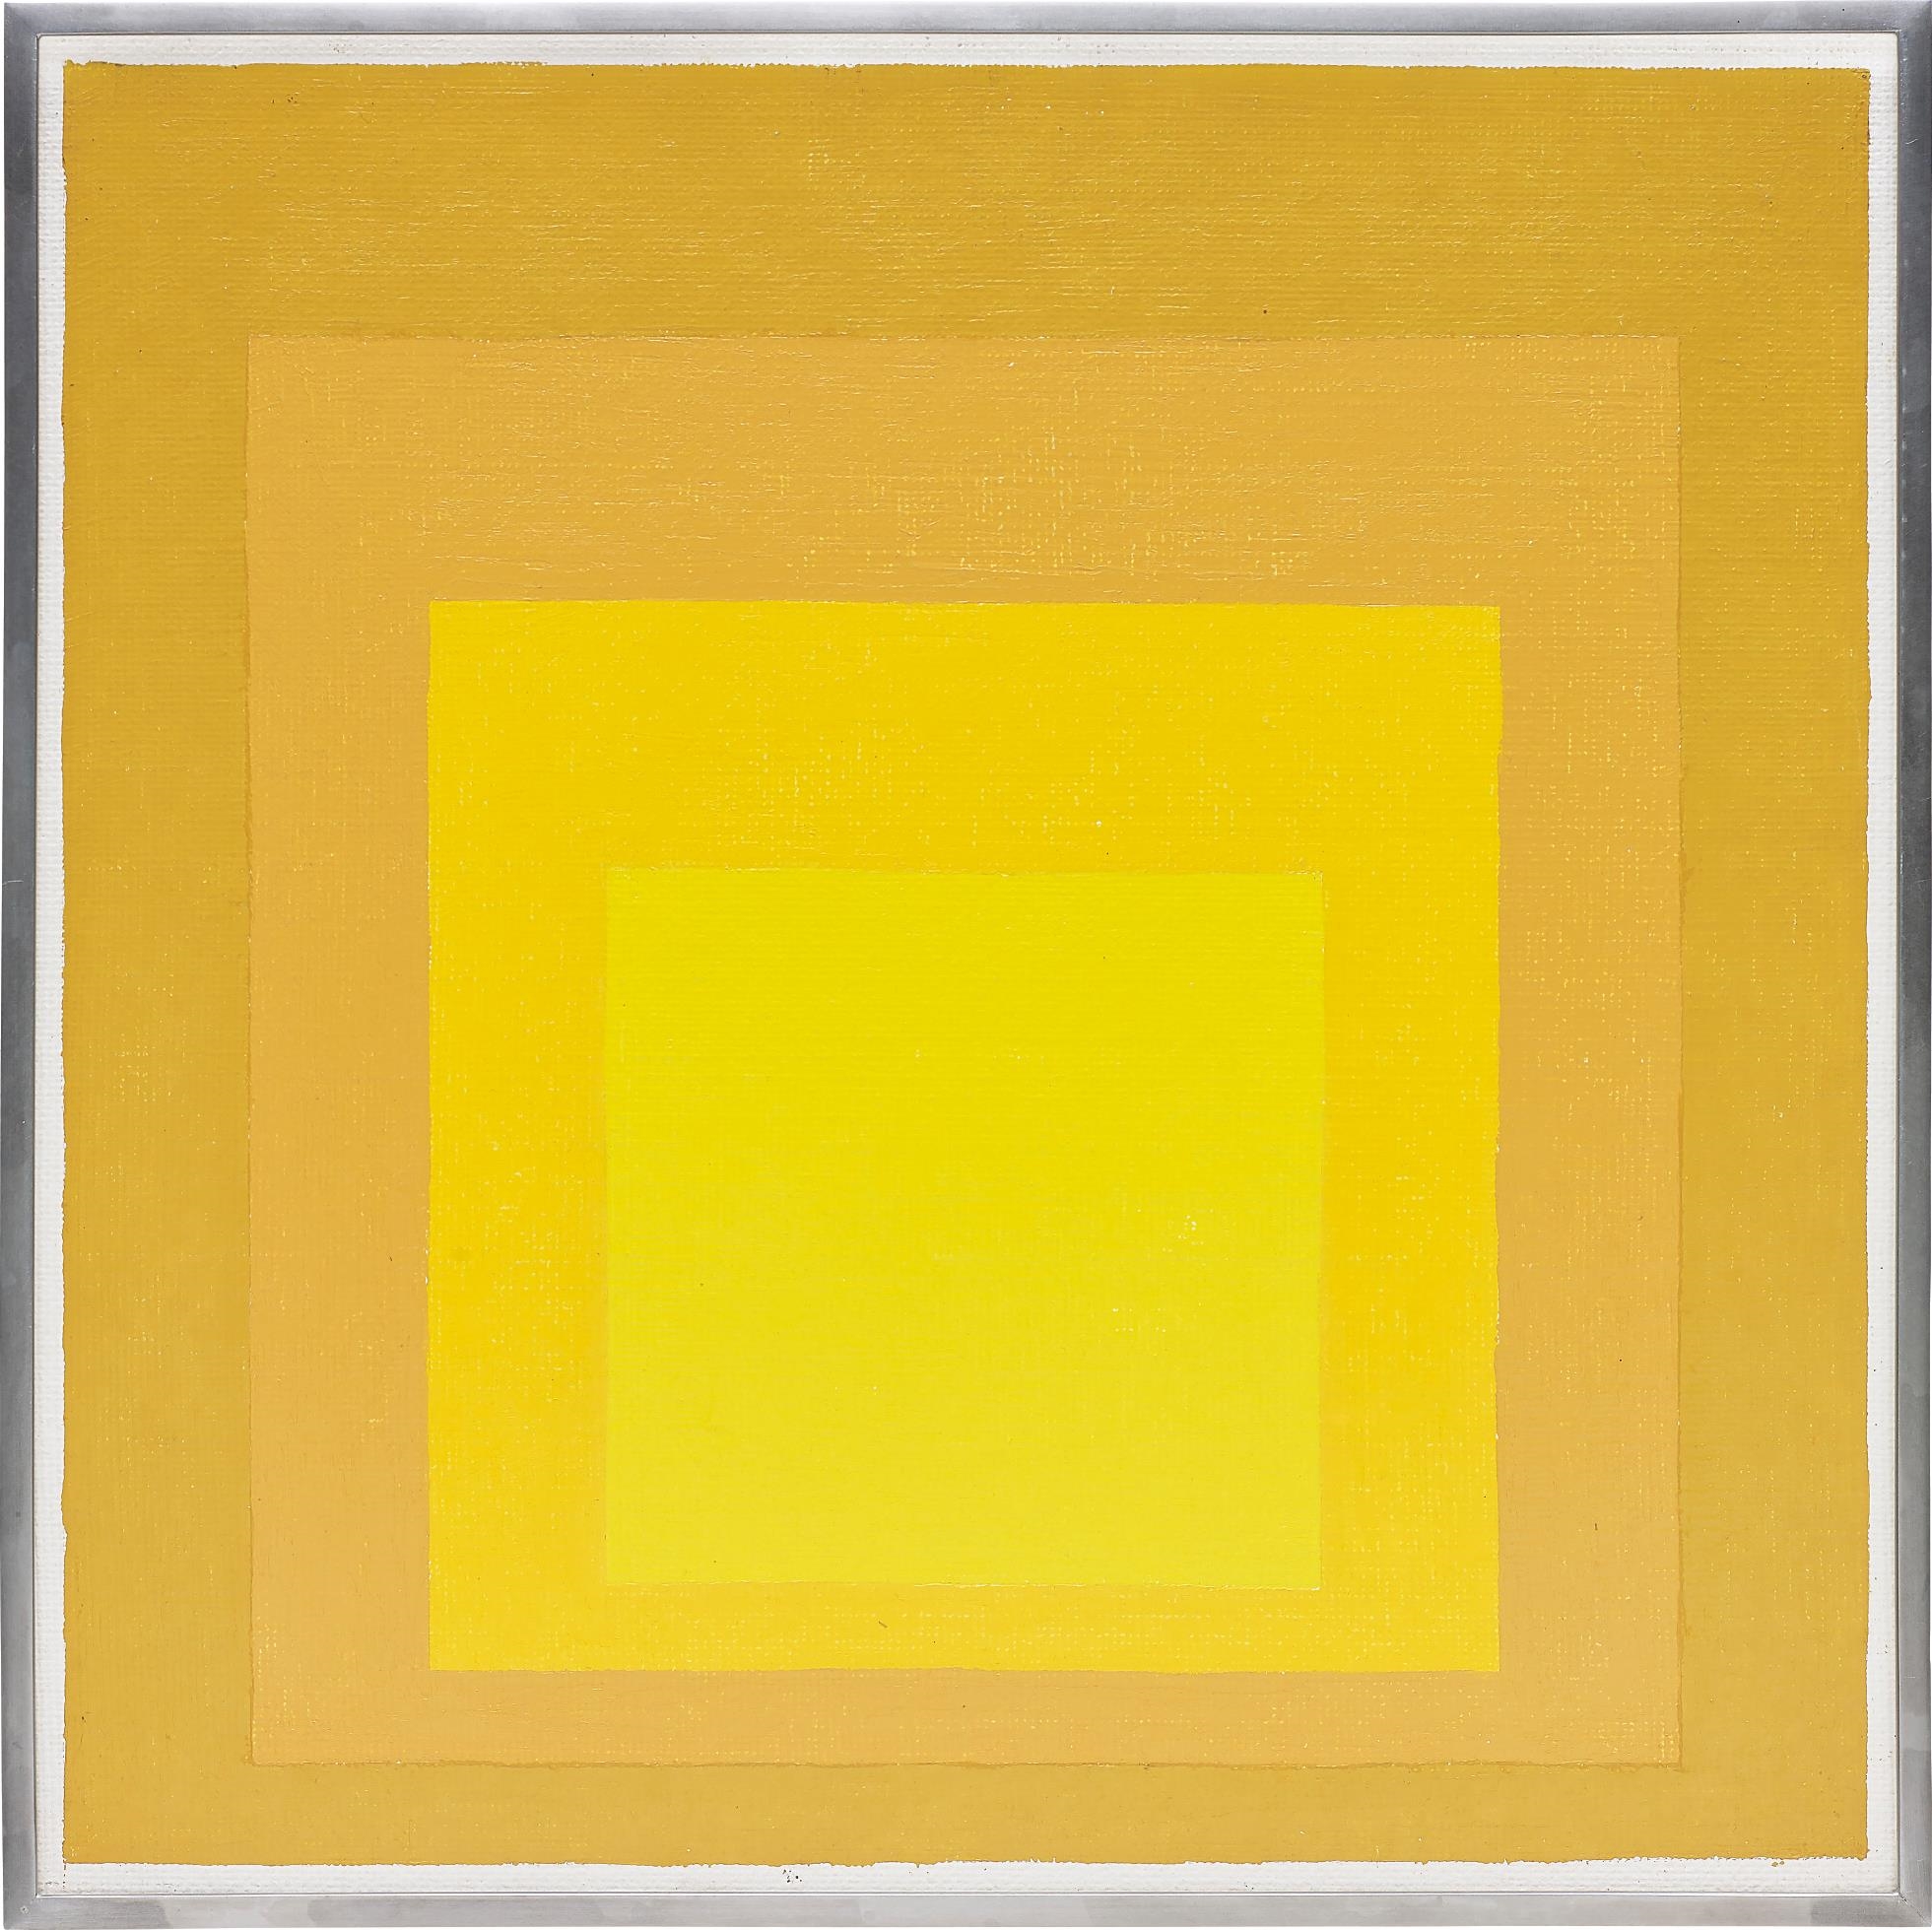 Homage to the Square by Josef Albers, 1962-1976